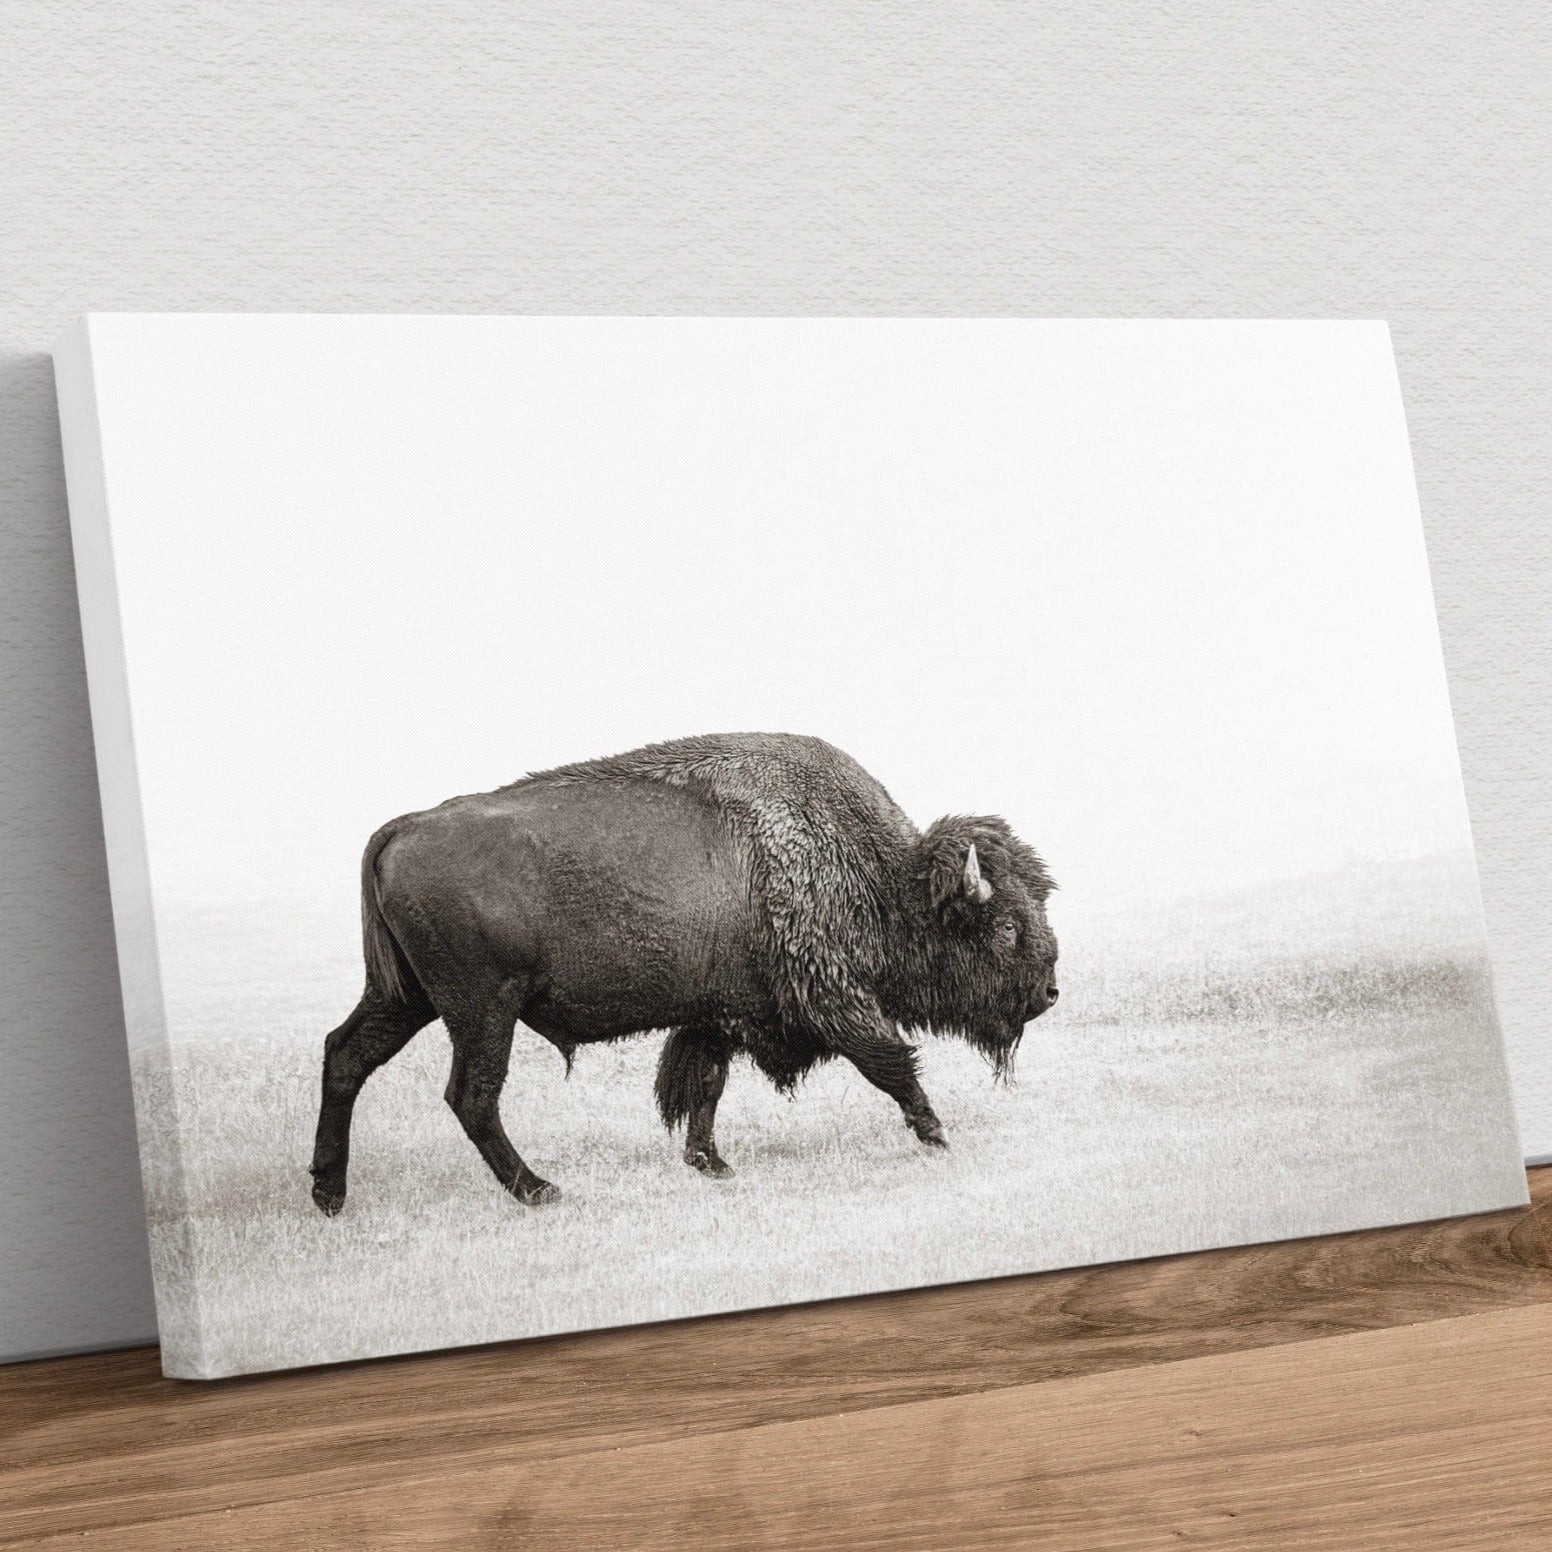 Minimalist Bison Art Canvas Canvas-Unframed / 12 x 18 Inches Wall Art Teri James Photography